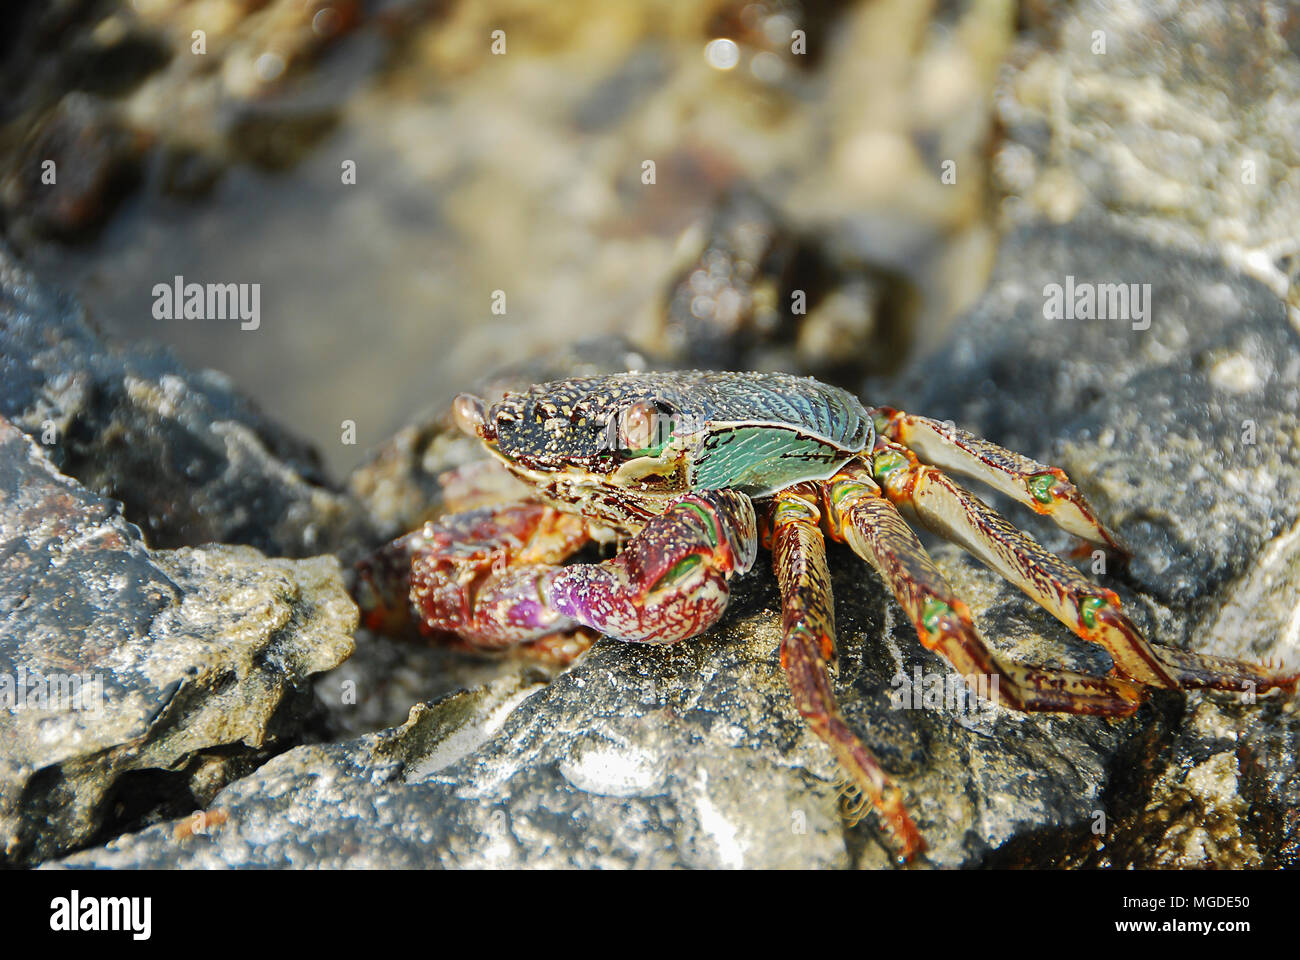 Colorful Crab decapods, yellow red legs and blue green strip carapace or crabshell, sea crab in south coast of Thailand Stock Photo